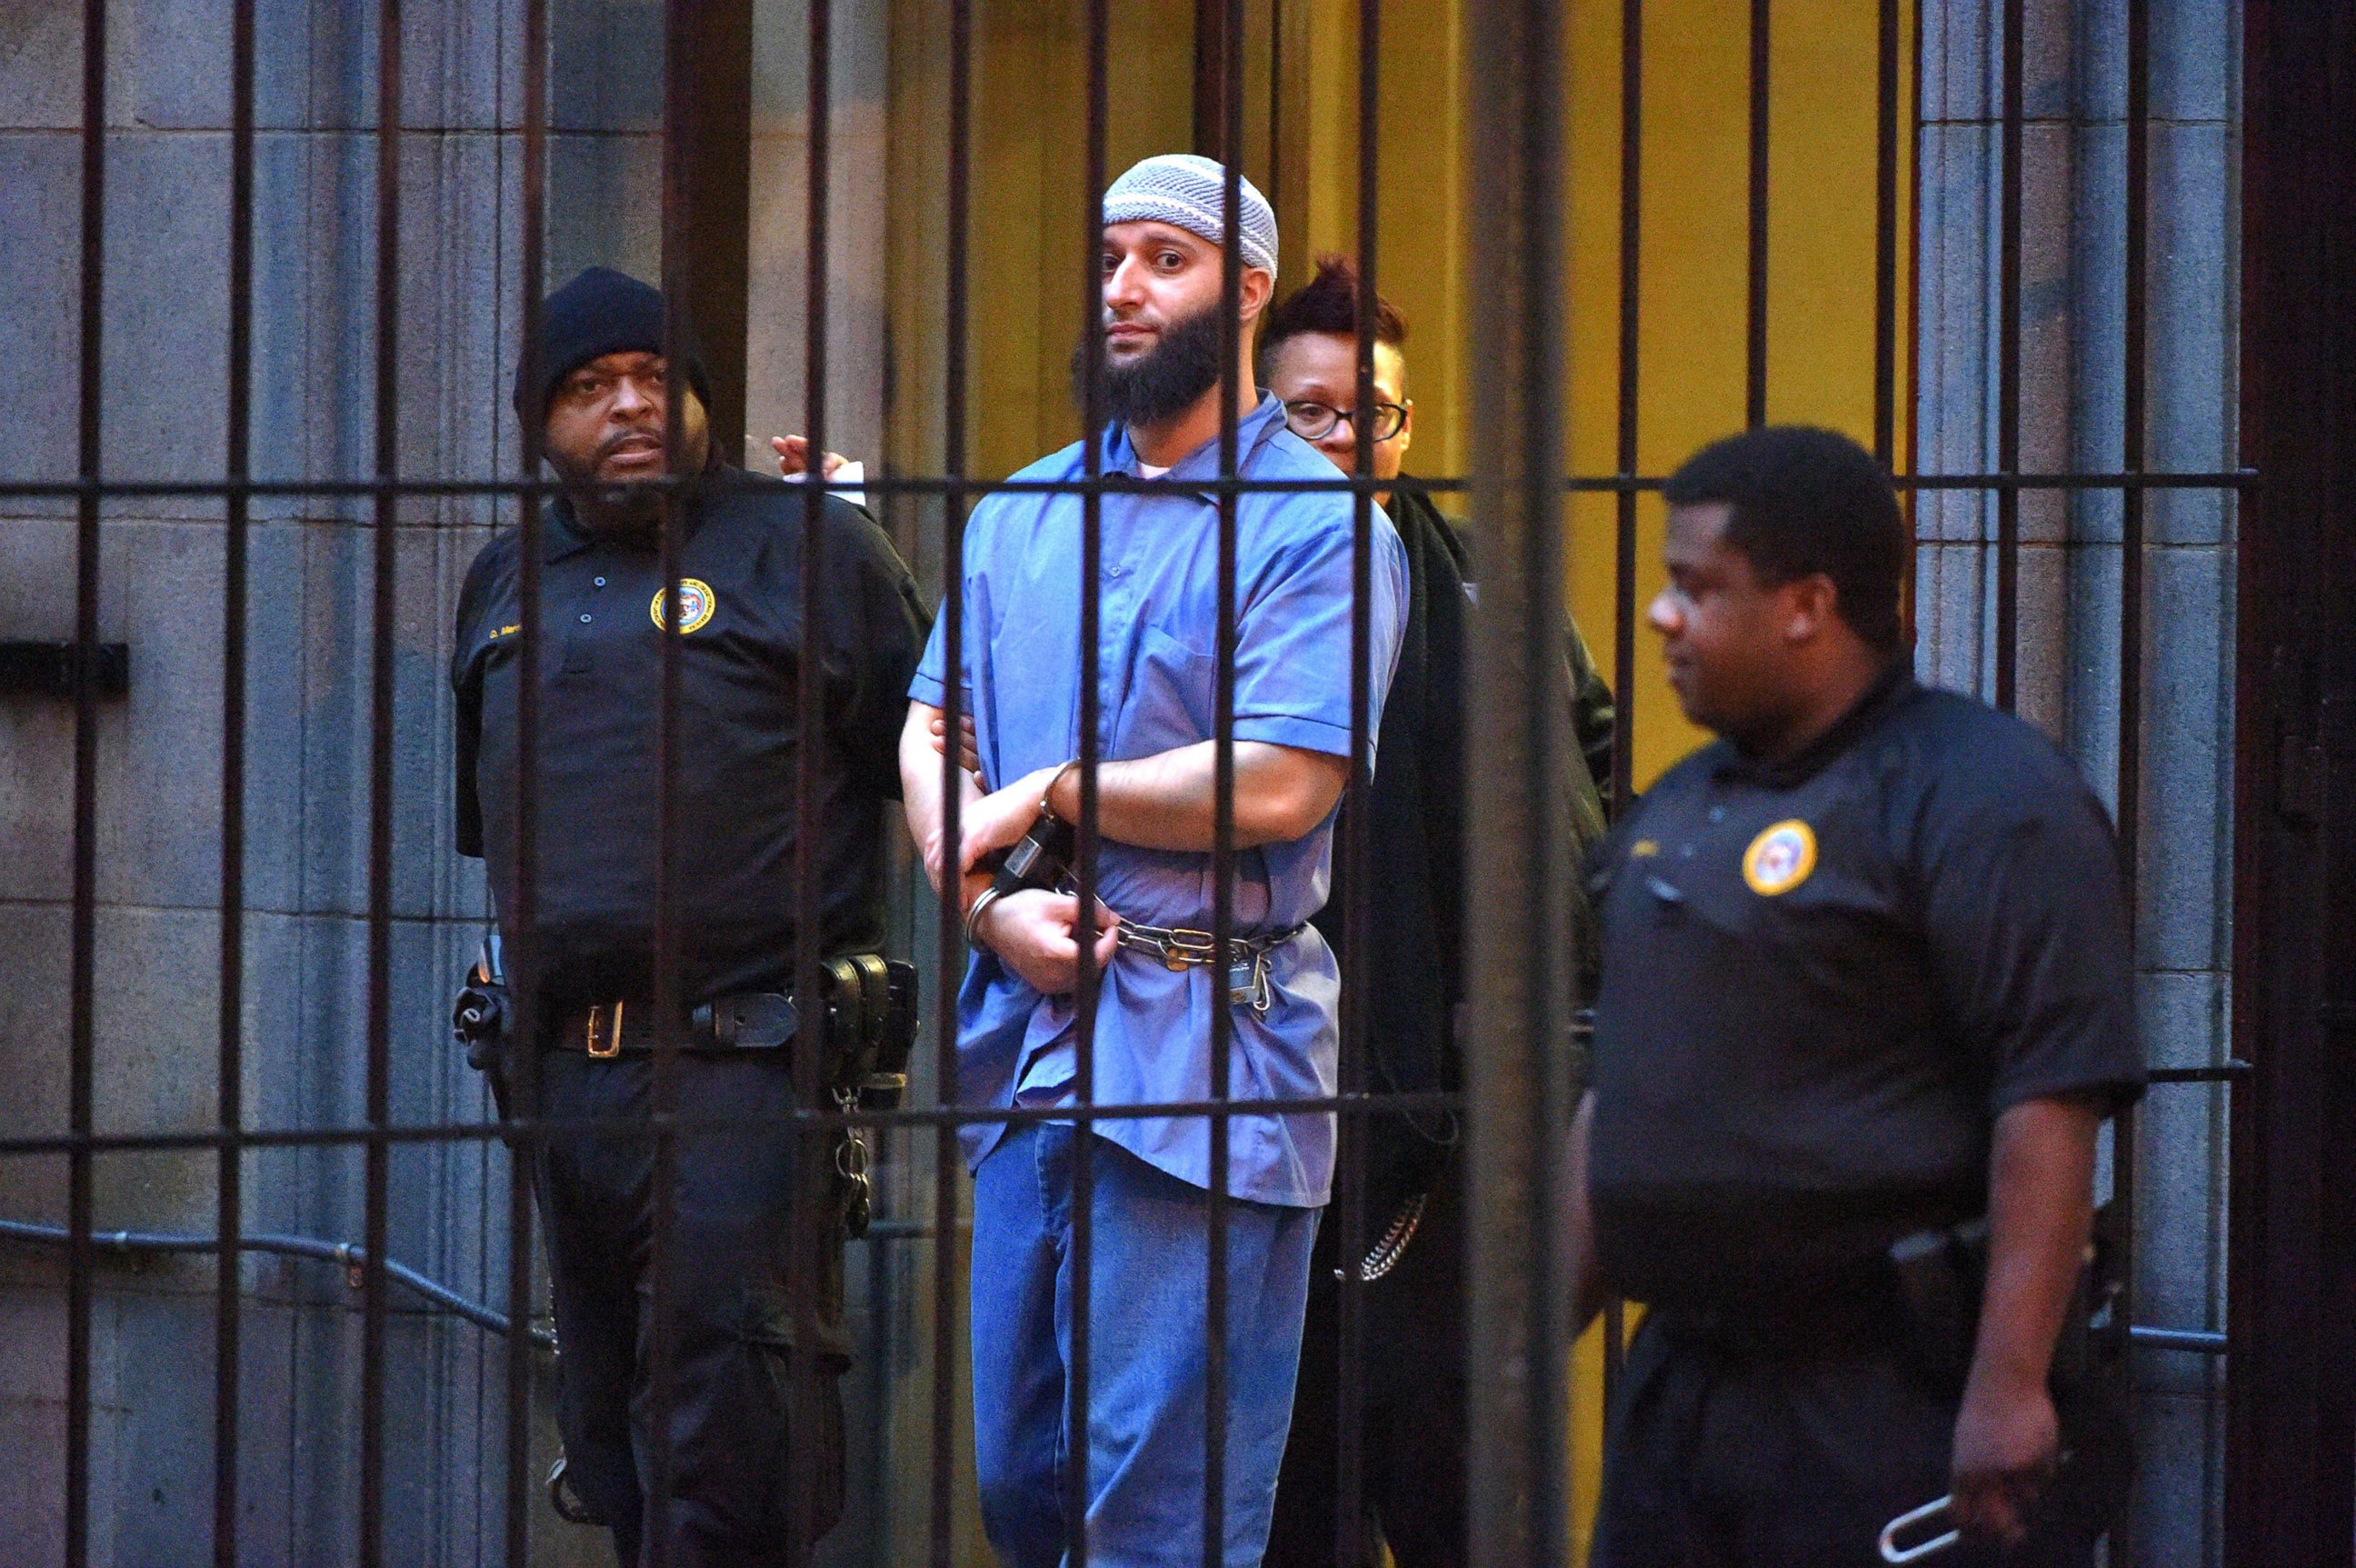 PHOTO: Officials escort "Serial" podcast subject Adnan Syed from the courthouse following the completion of the first day of hearings for a retrial in Baltimore, Feb. 3, 2016.